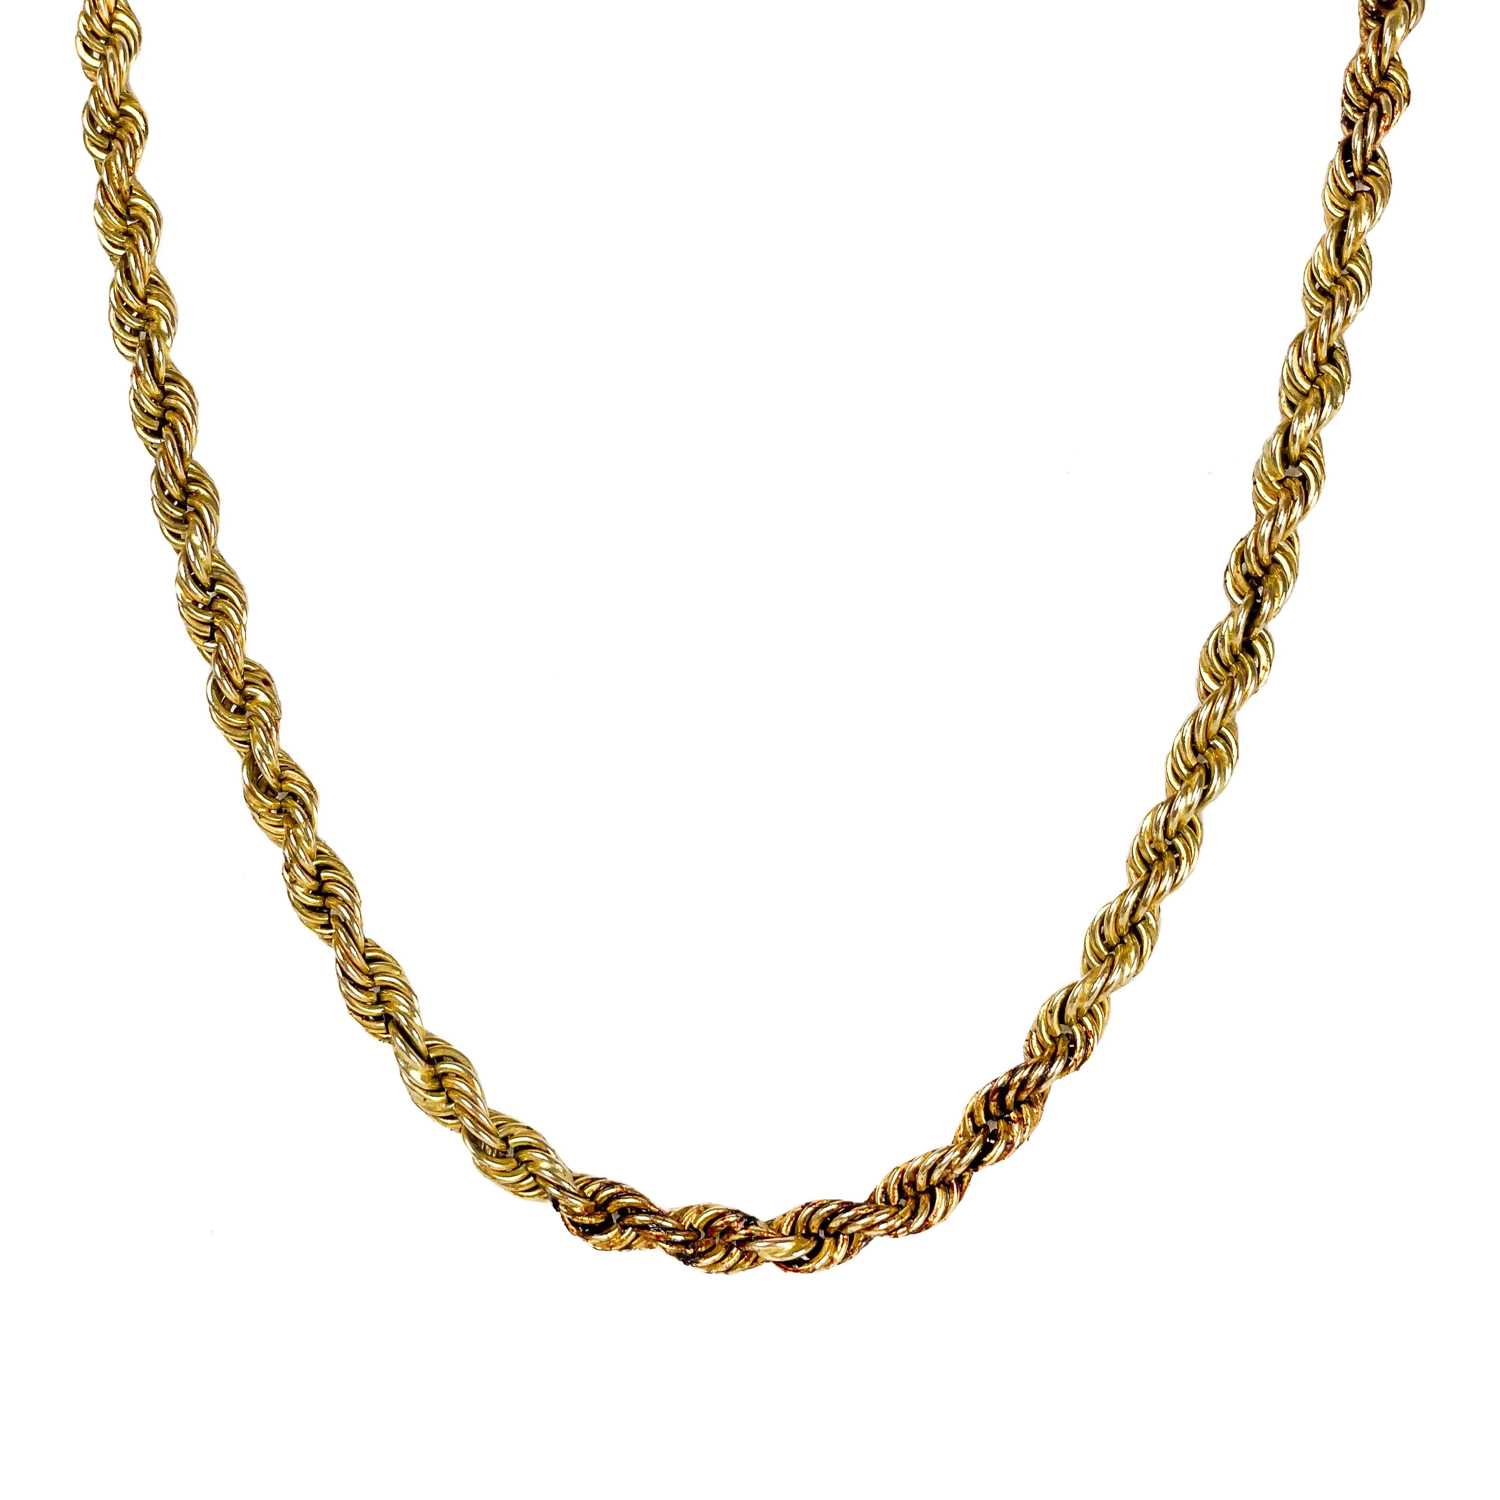 A 9ct gold rope twist long necklace.